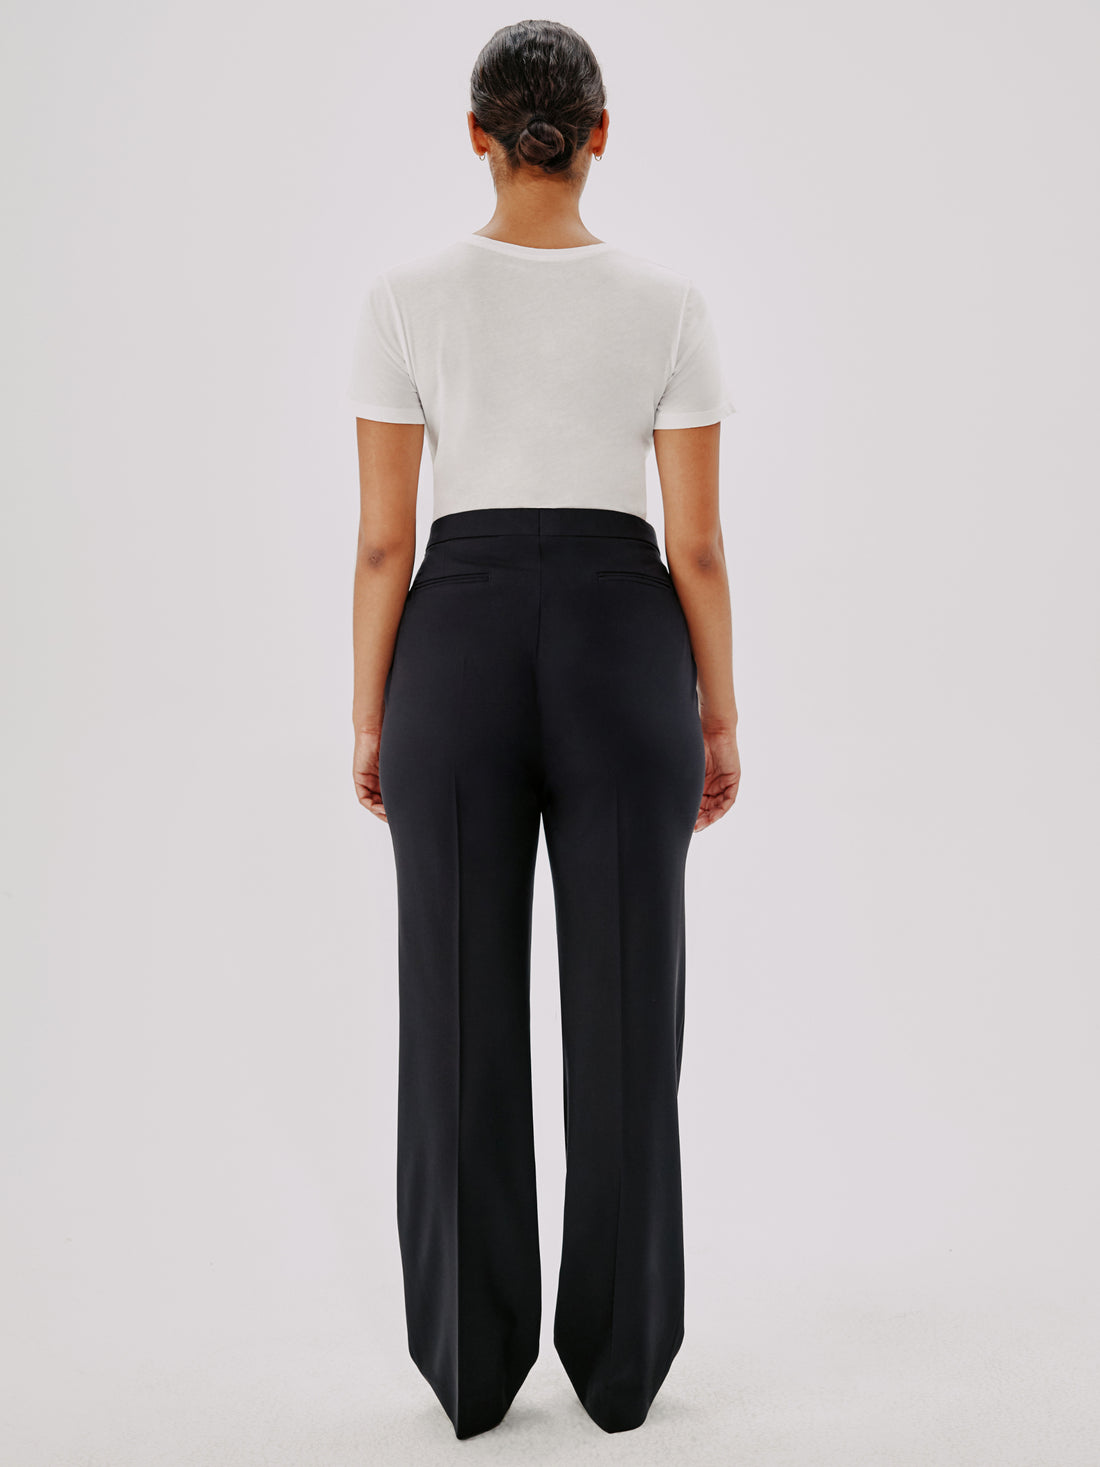 AREA Flared & Bell-Bottom Pants for Women - Shop Now at Farfetch Canada